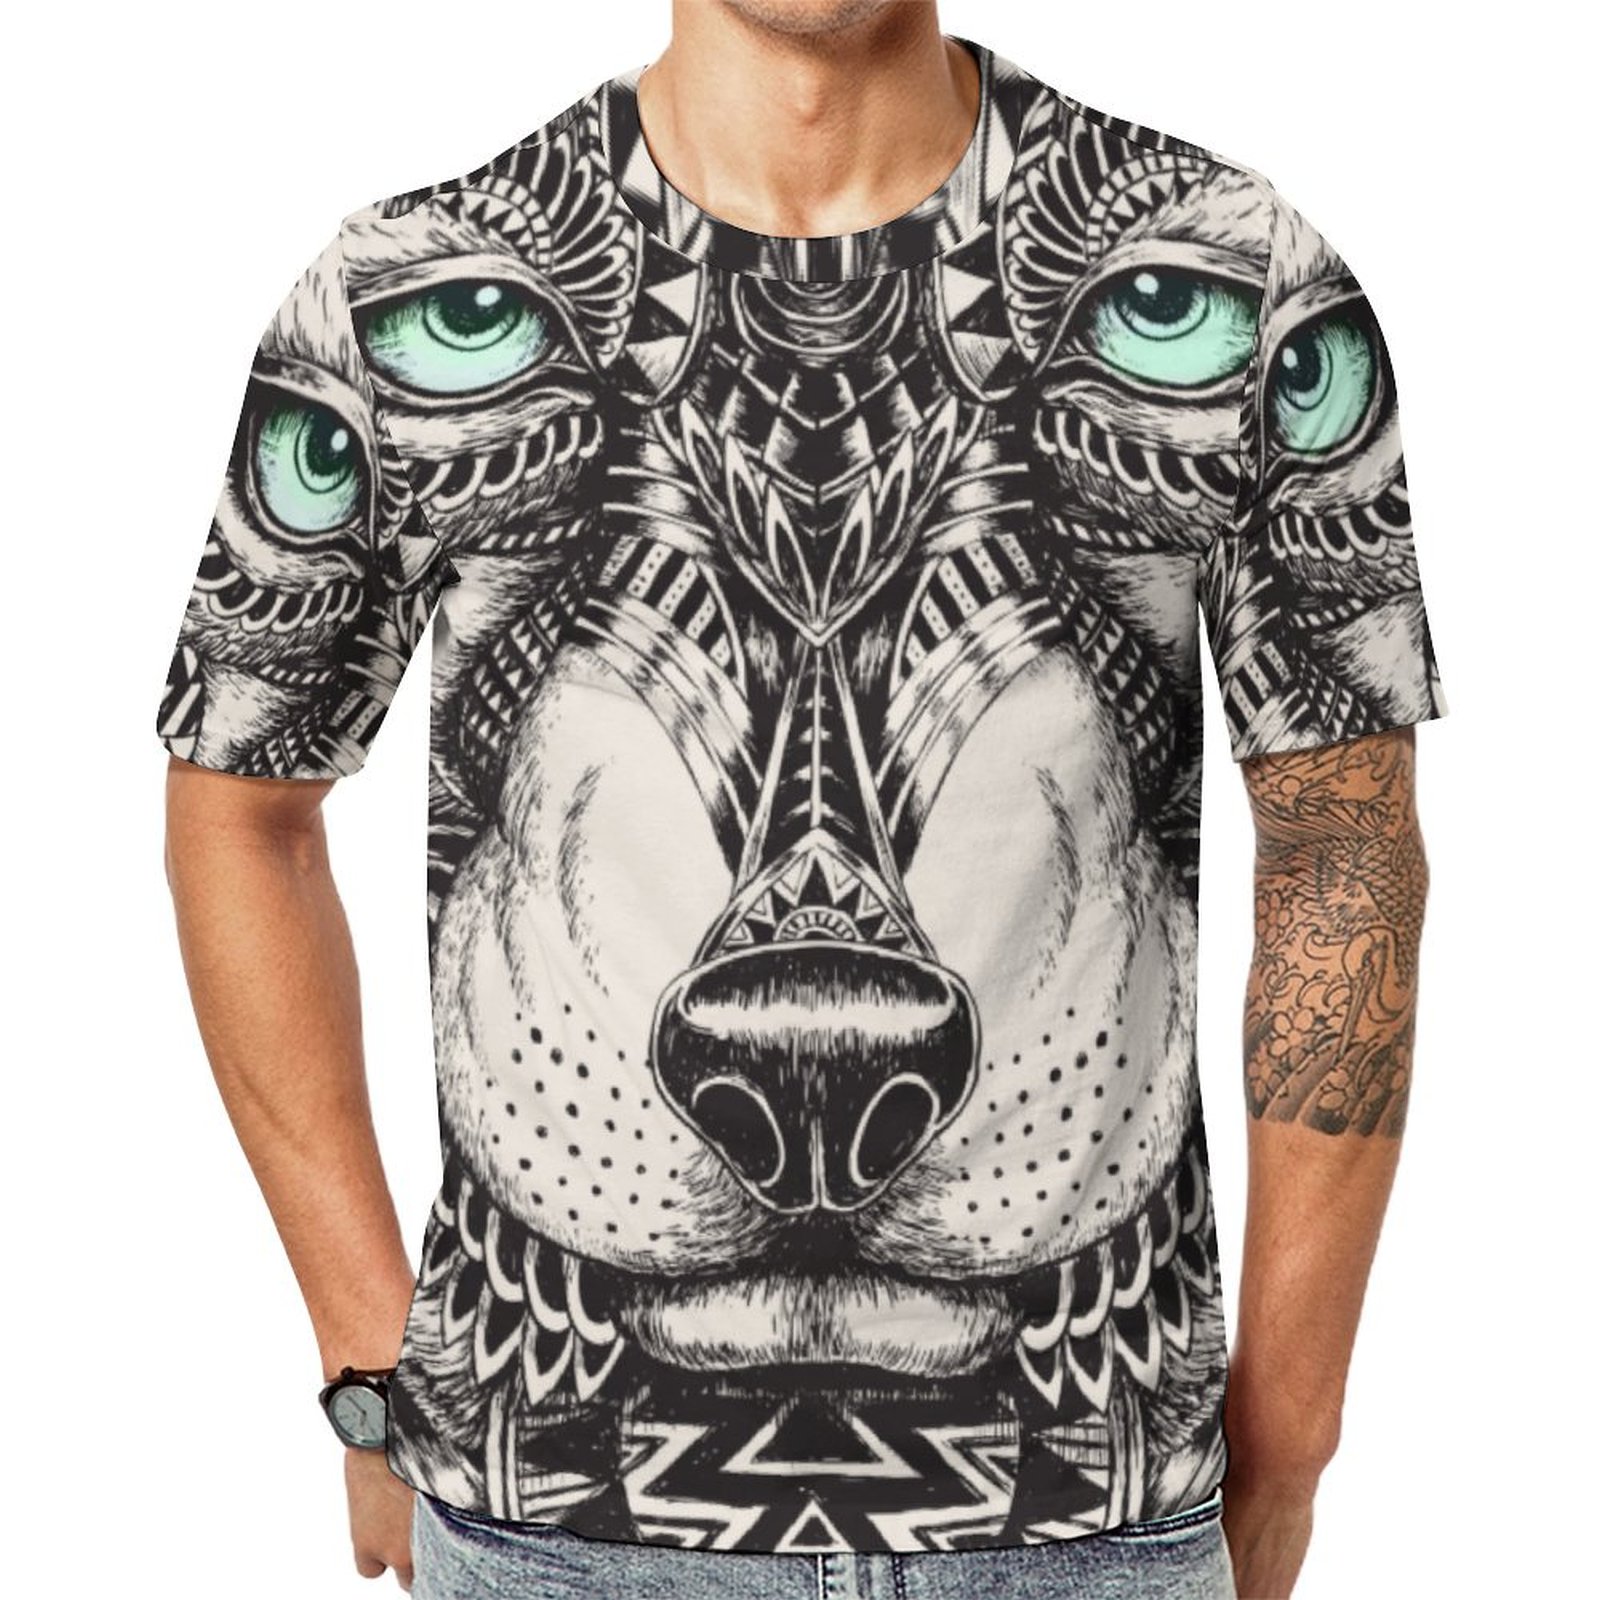 Green Eyed Wolf Ornate Face Short Sleeve Print Unisex Tshirt Summer Casual Tees for Men and Women Coolcoshirts